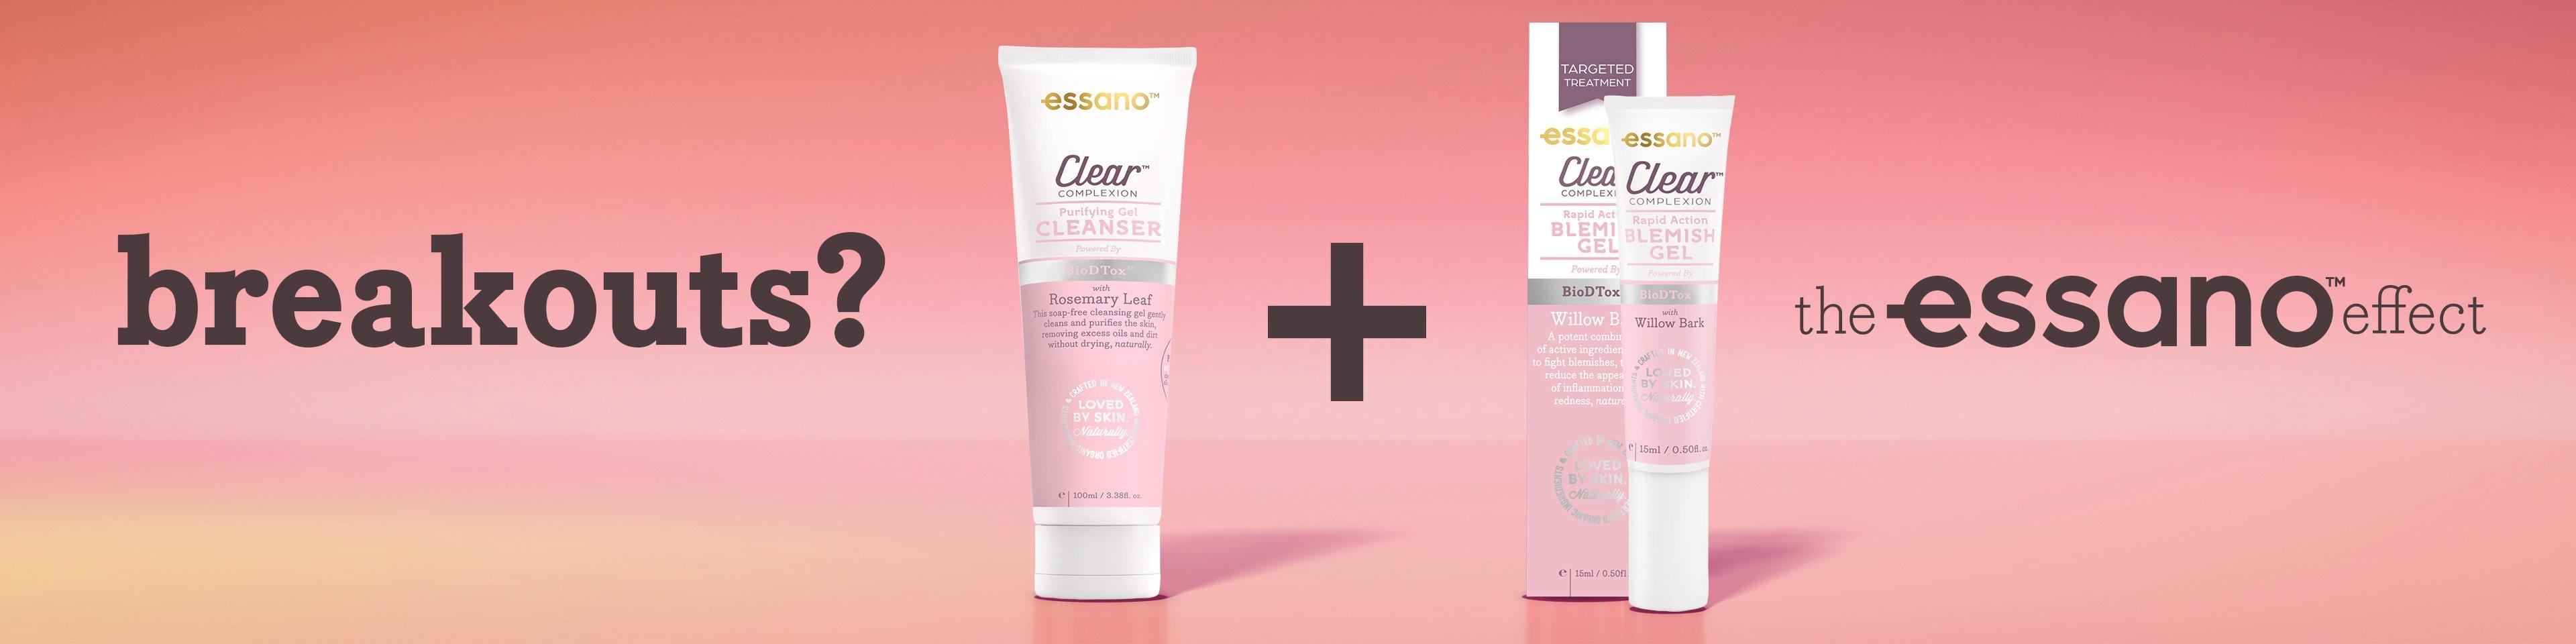 How to get the confidence of clear skin, naturally